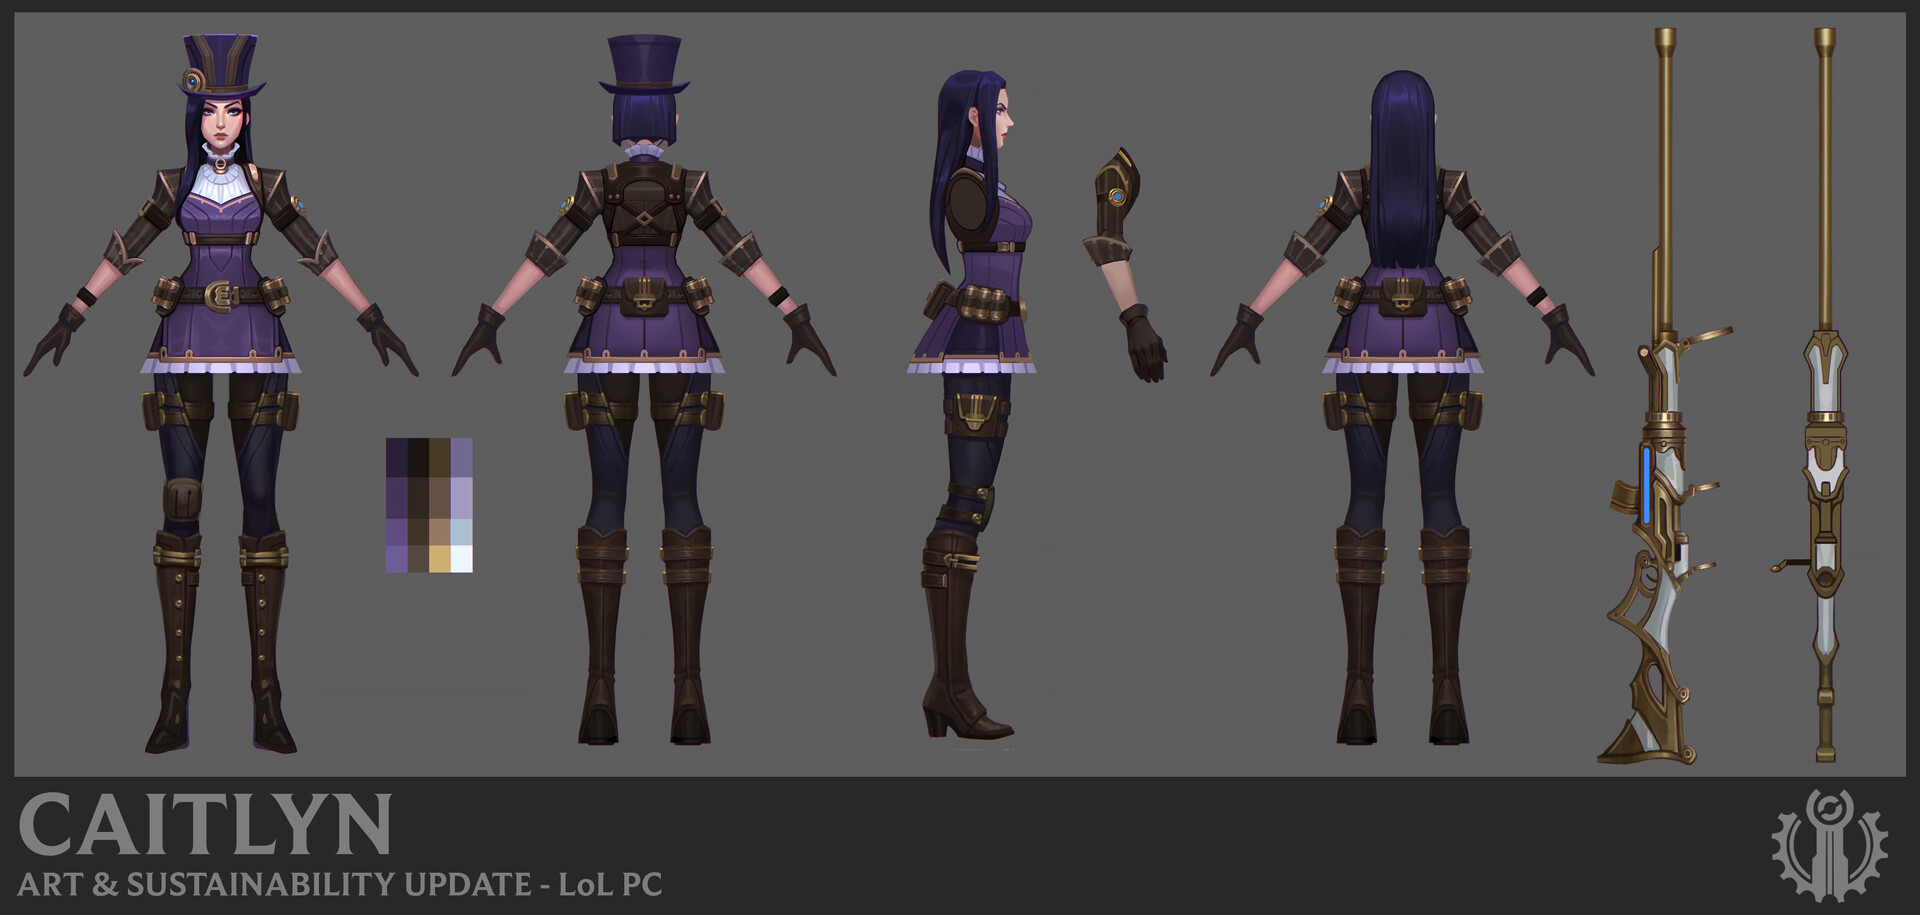 New Caitlyn figure hits the Riot shop - The Rift Herald